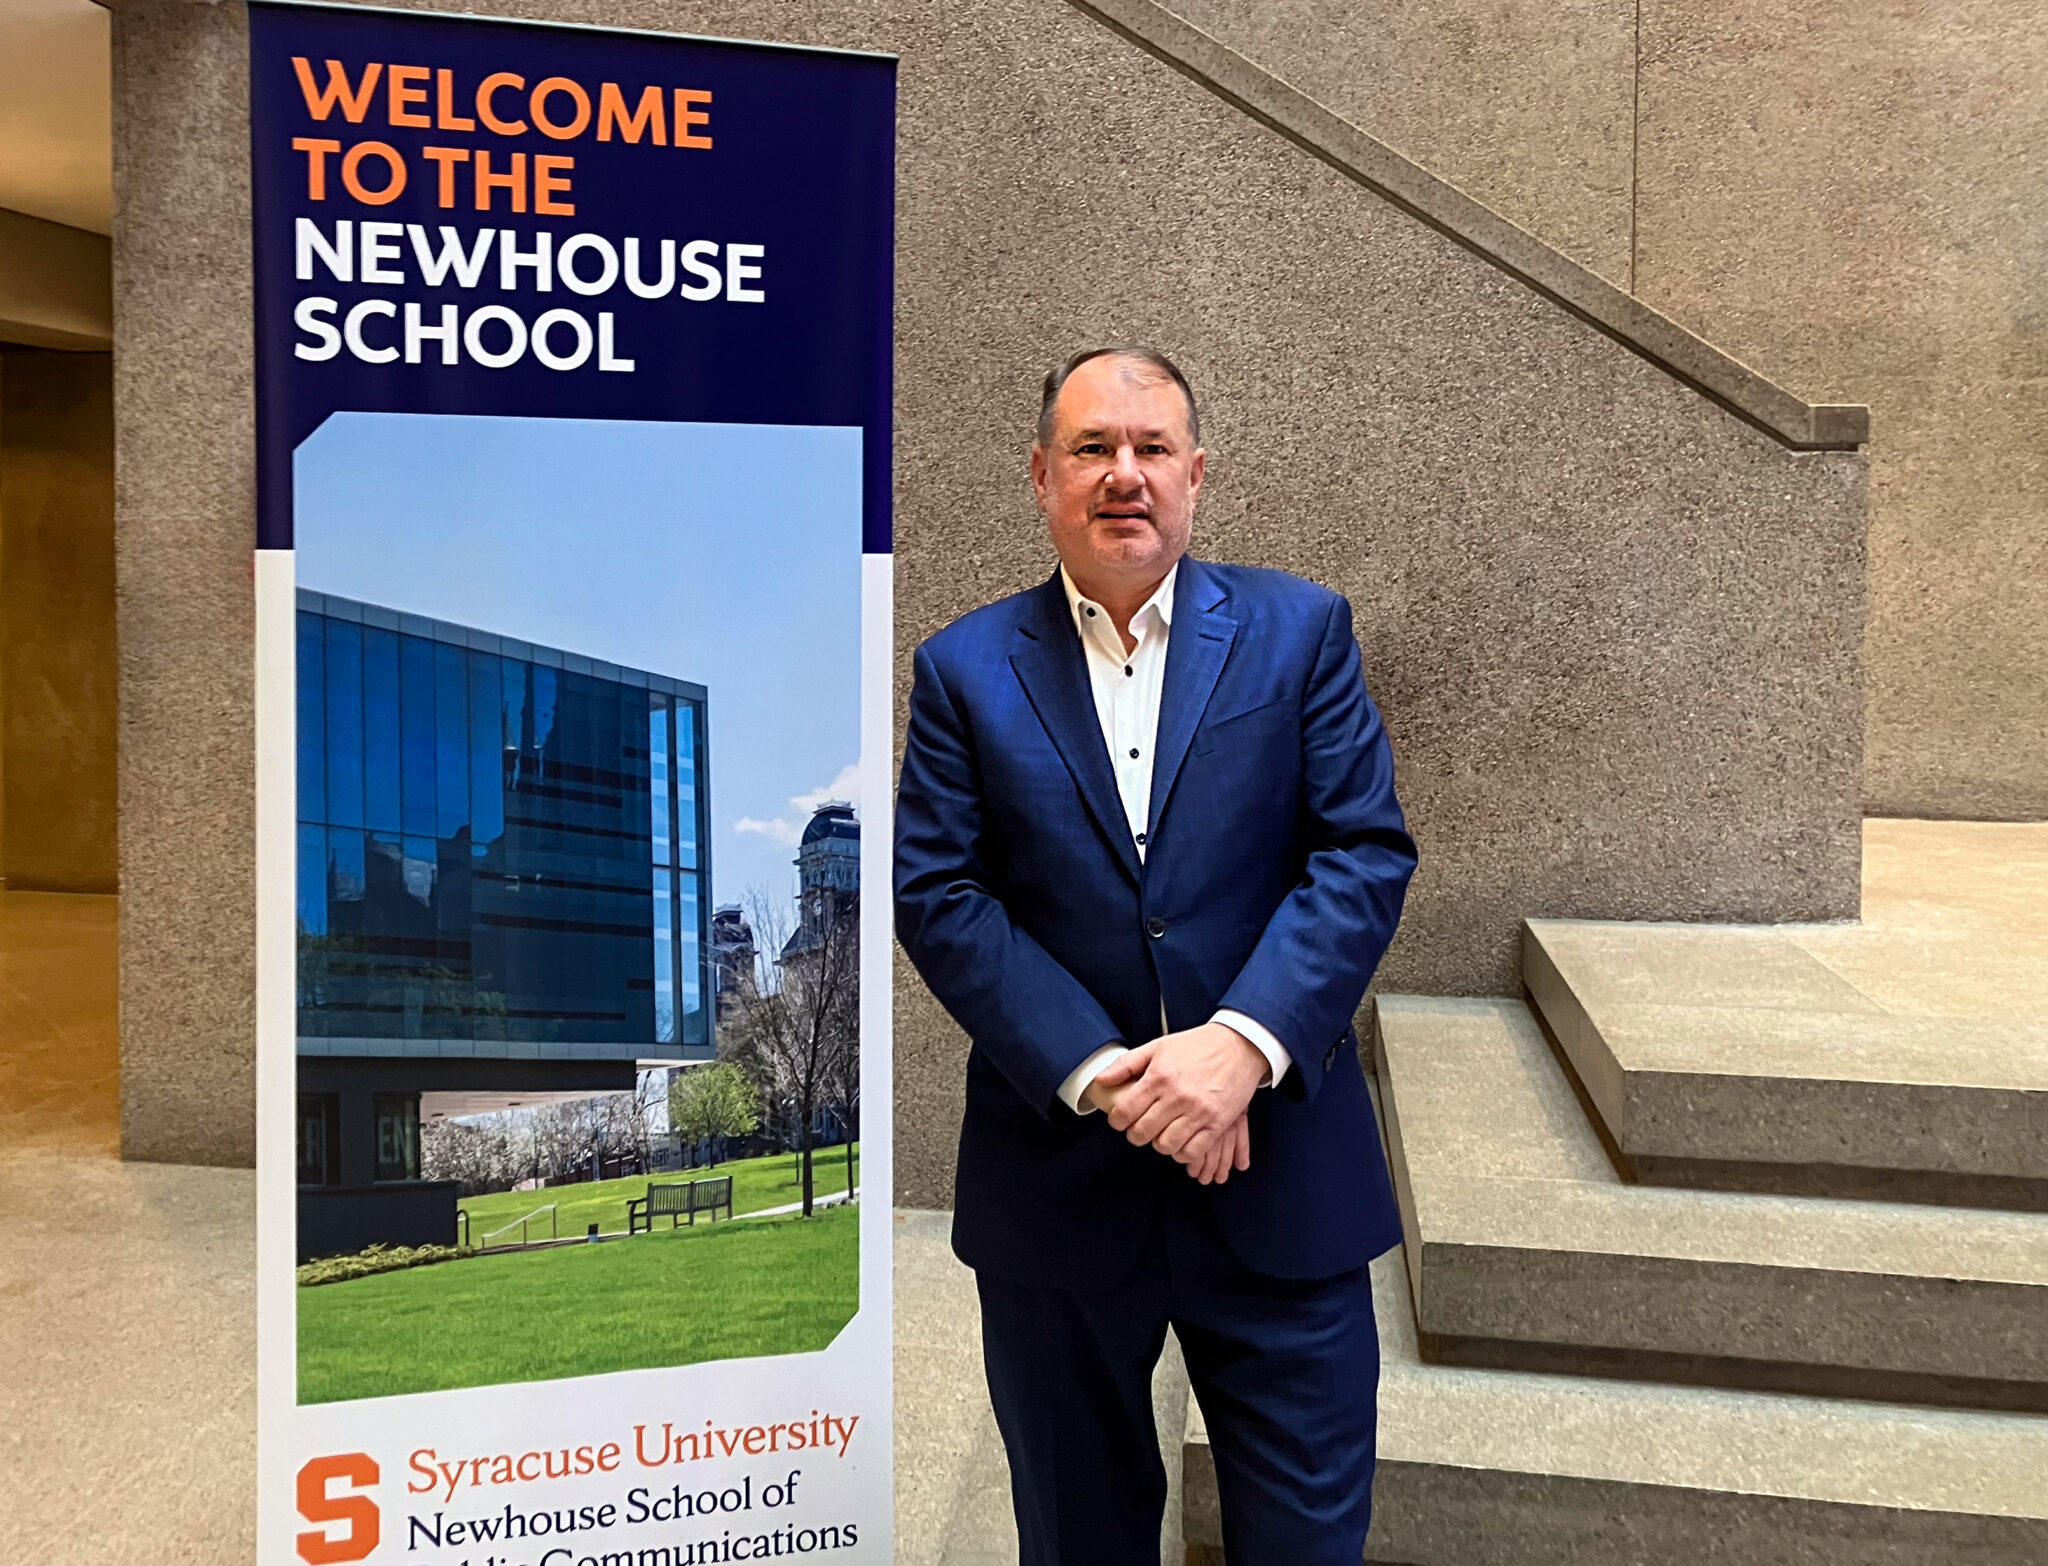 a person stands next to a sign that says "Welcome to the Newhouse School" in the Newhouse 1 lobby